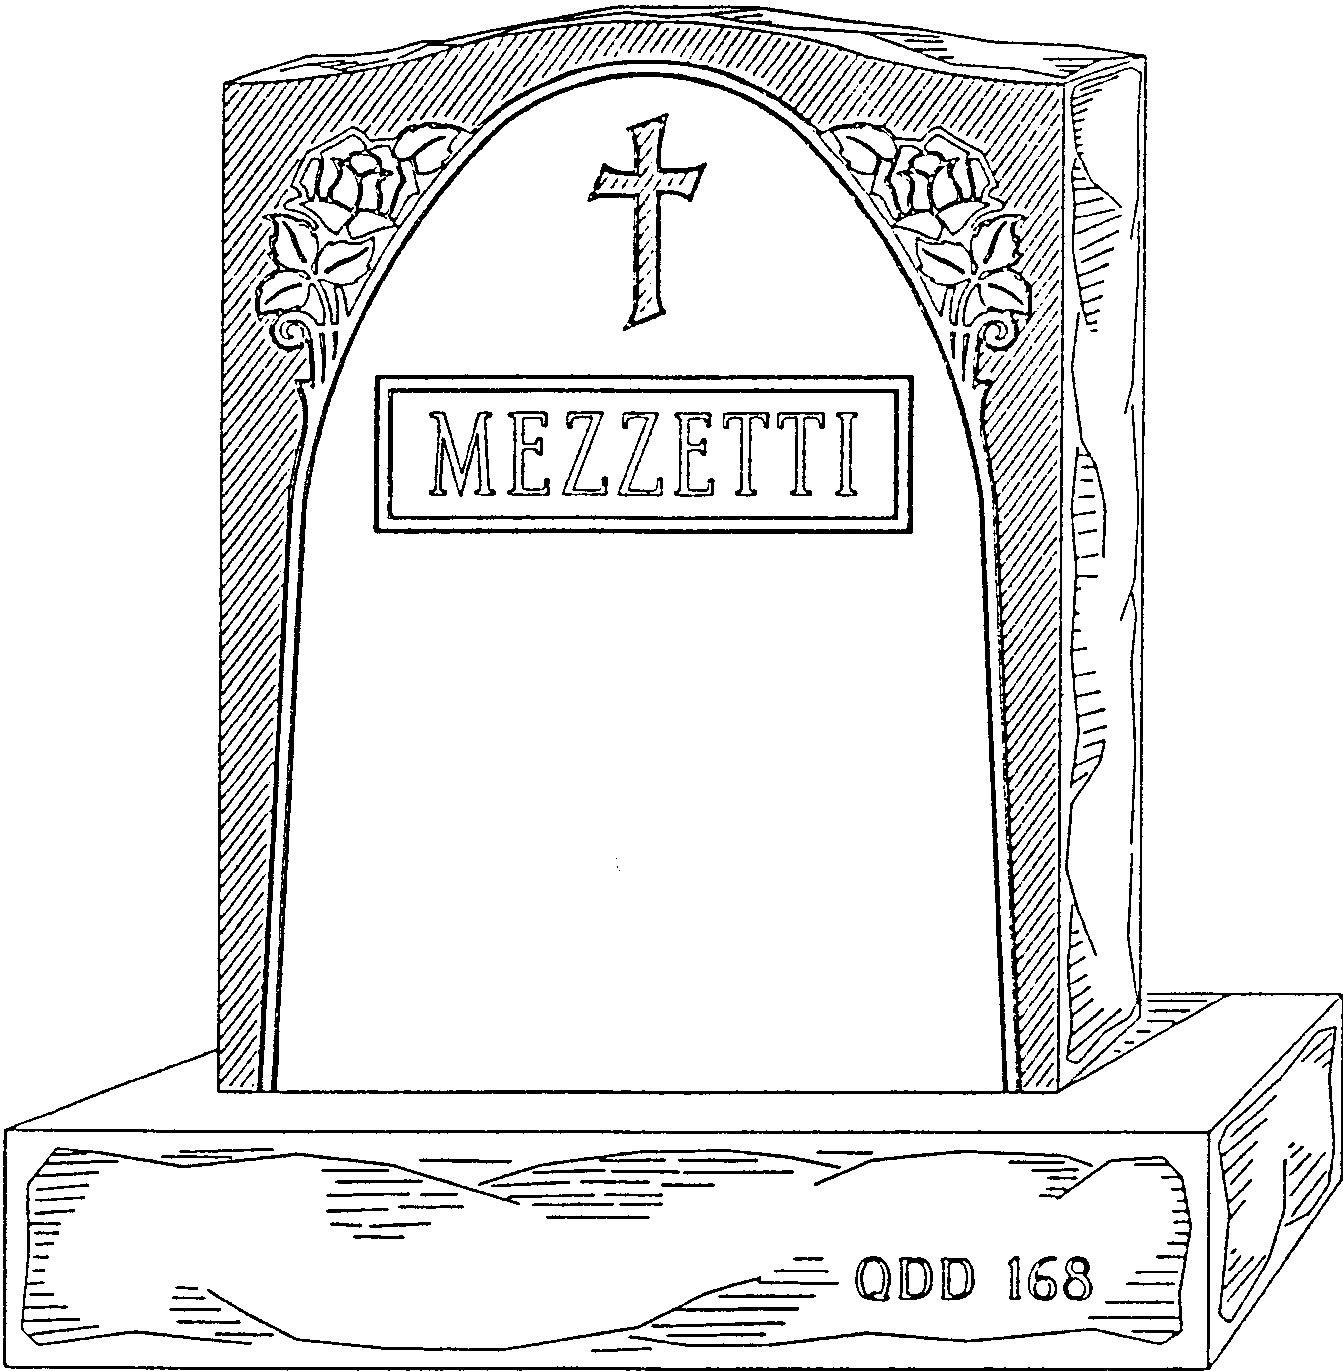 a black and white drawing of a gravestone with the name mezzetti on it